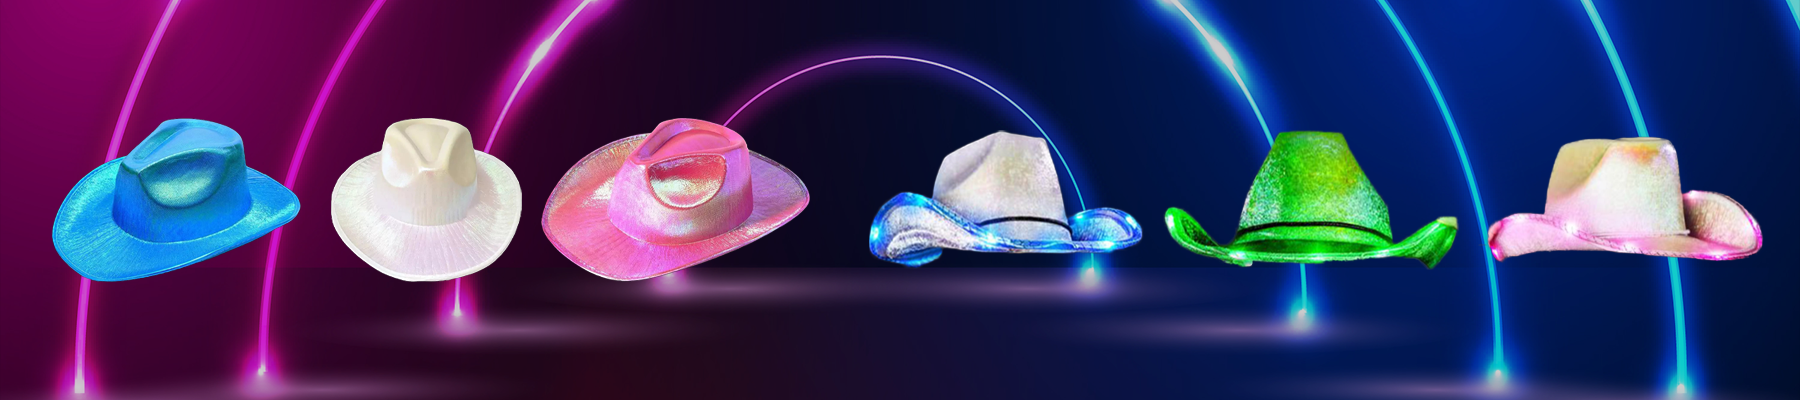 5 Things You Must Know About Space Cowboy Hats!